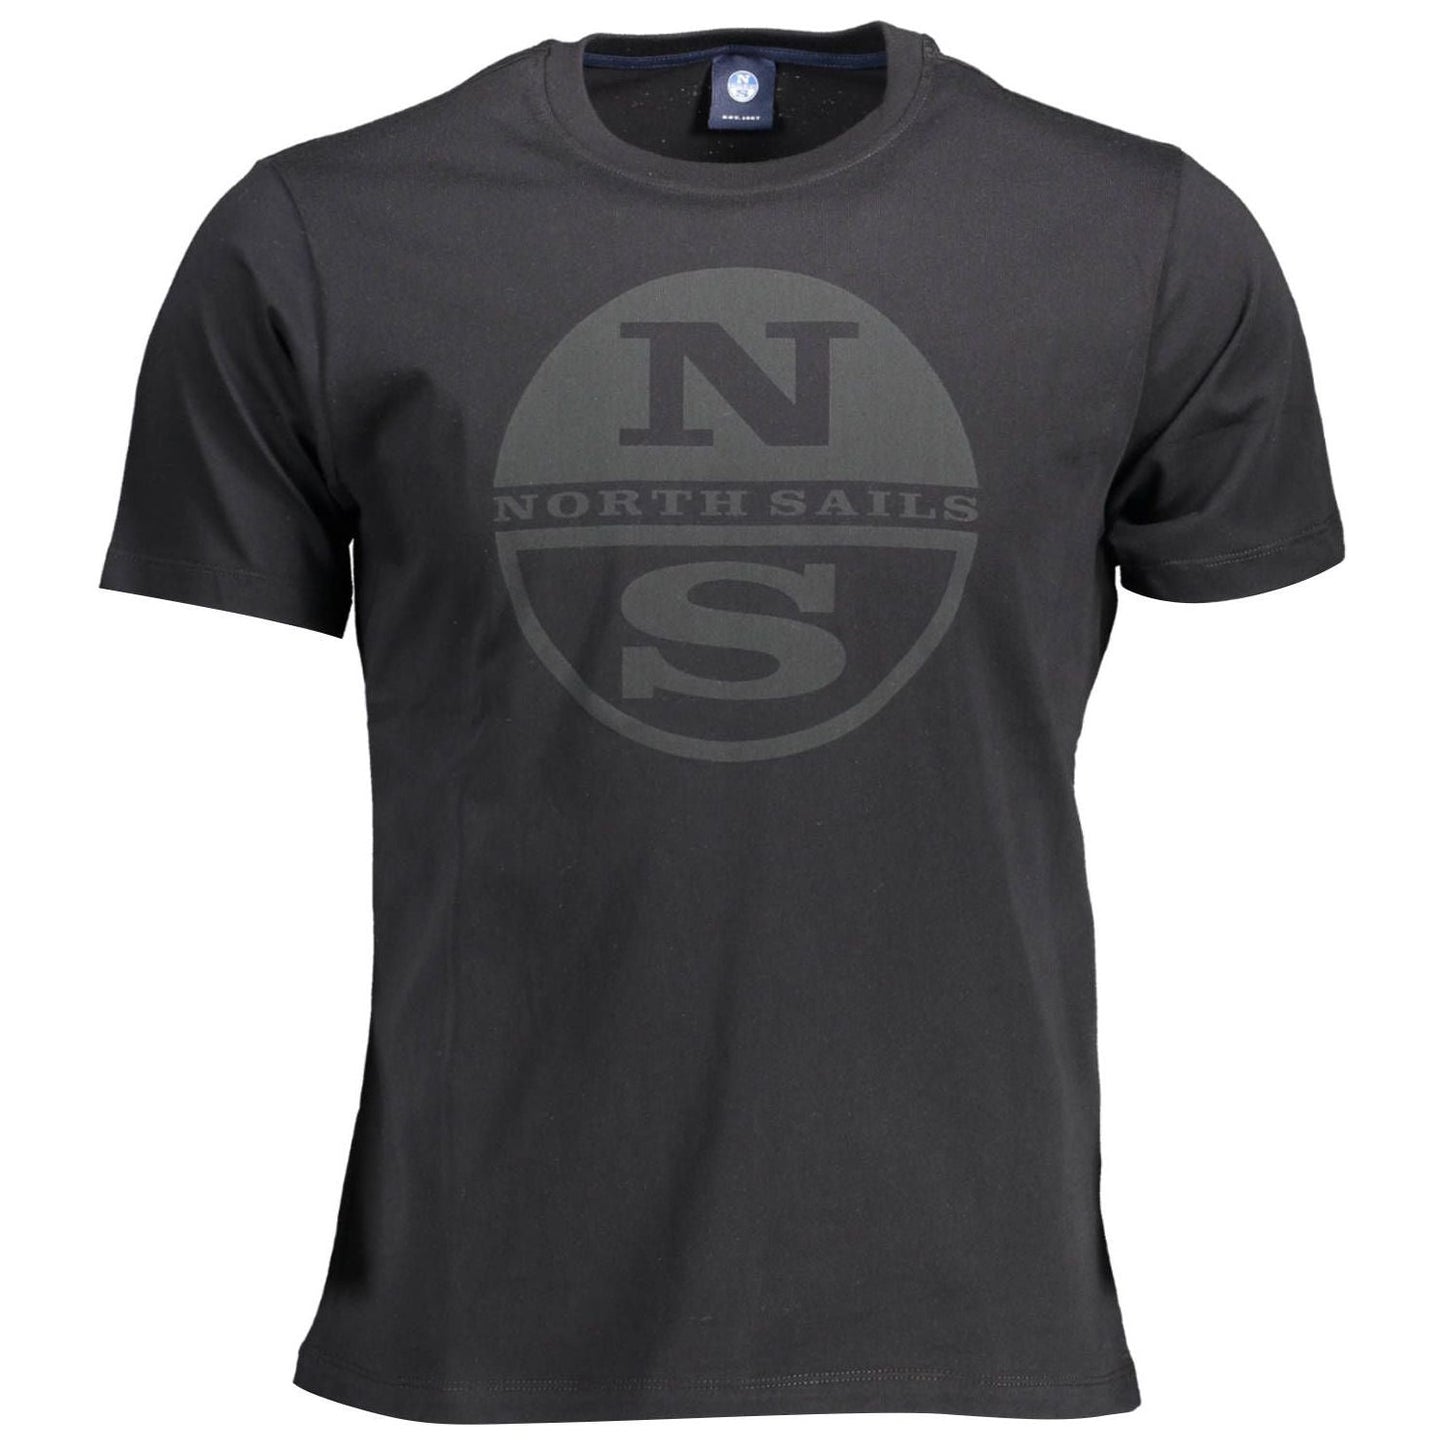 North Sails Sleek Black Cotton Tee with Iconic Print sleek-black-cotton-tee-with-iconic-print